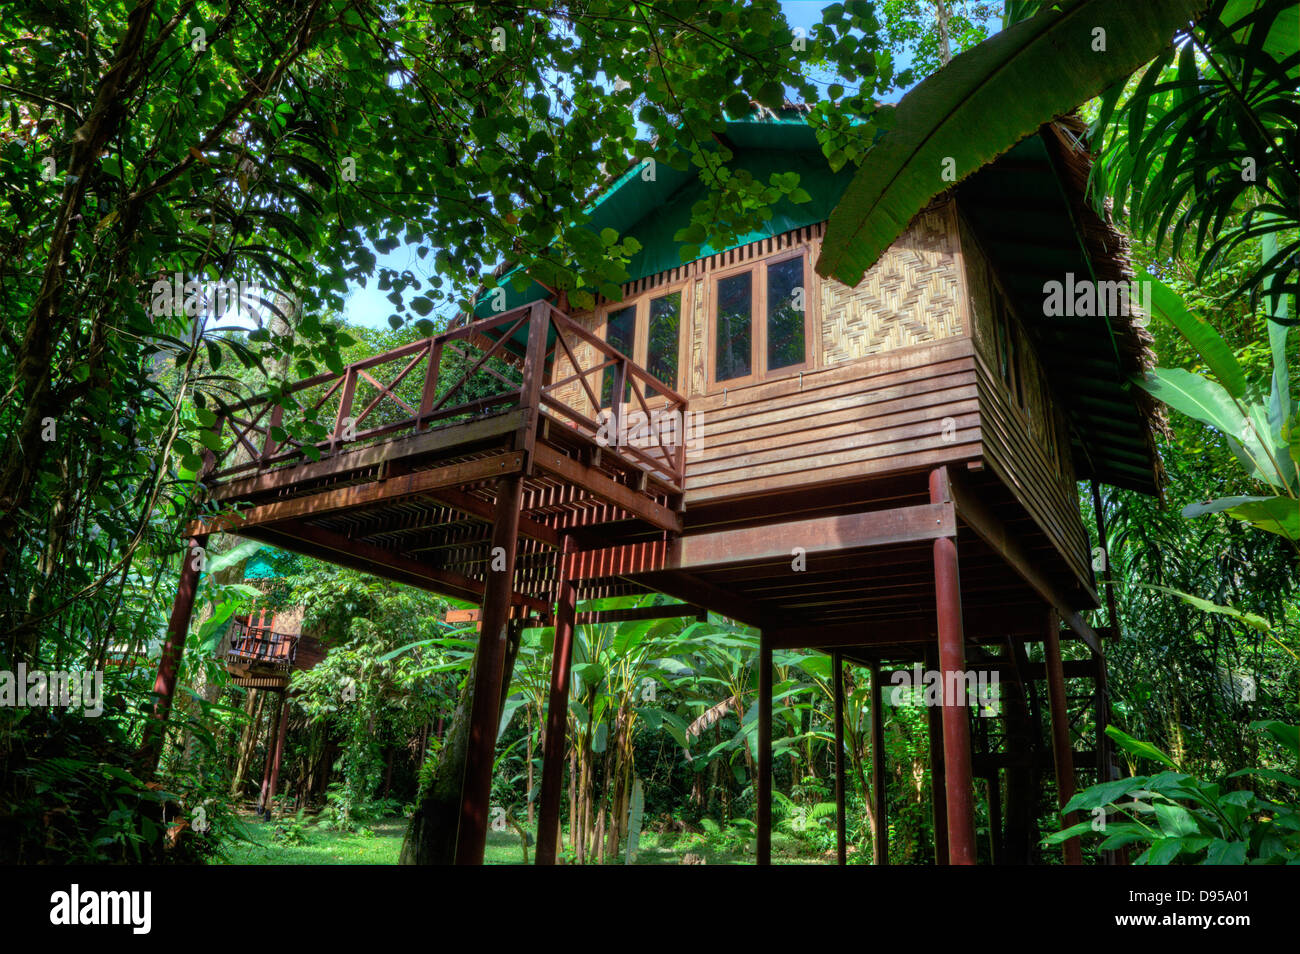 TREE HOUSES are the specialty of OUR JUNGLE HOUSE a lodge in the rainforest  near KHAO SOK NATIONAL PARK - SURATHANI PROVENCE, TH Stock Photo - Alamy